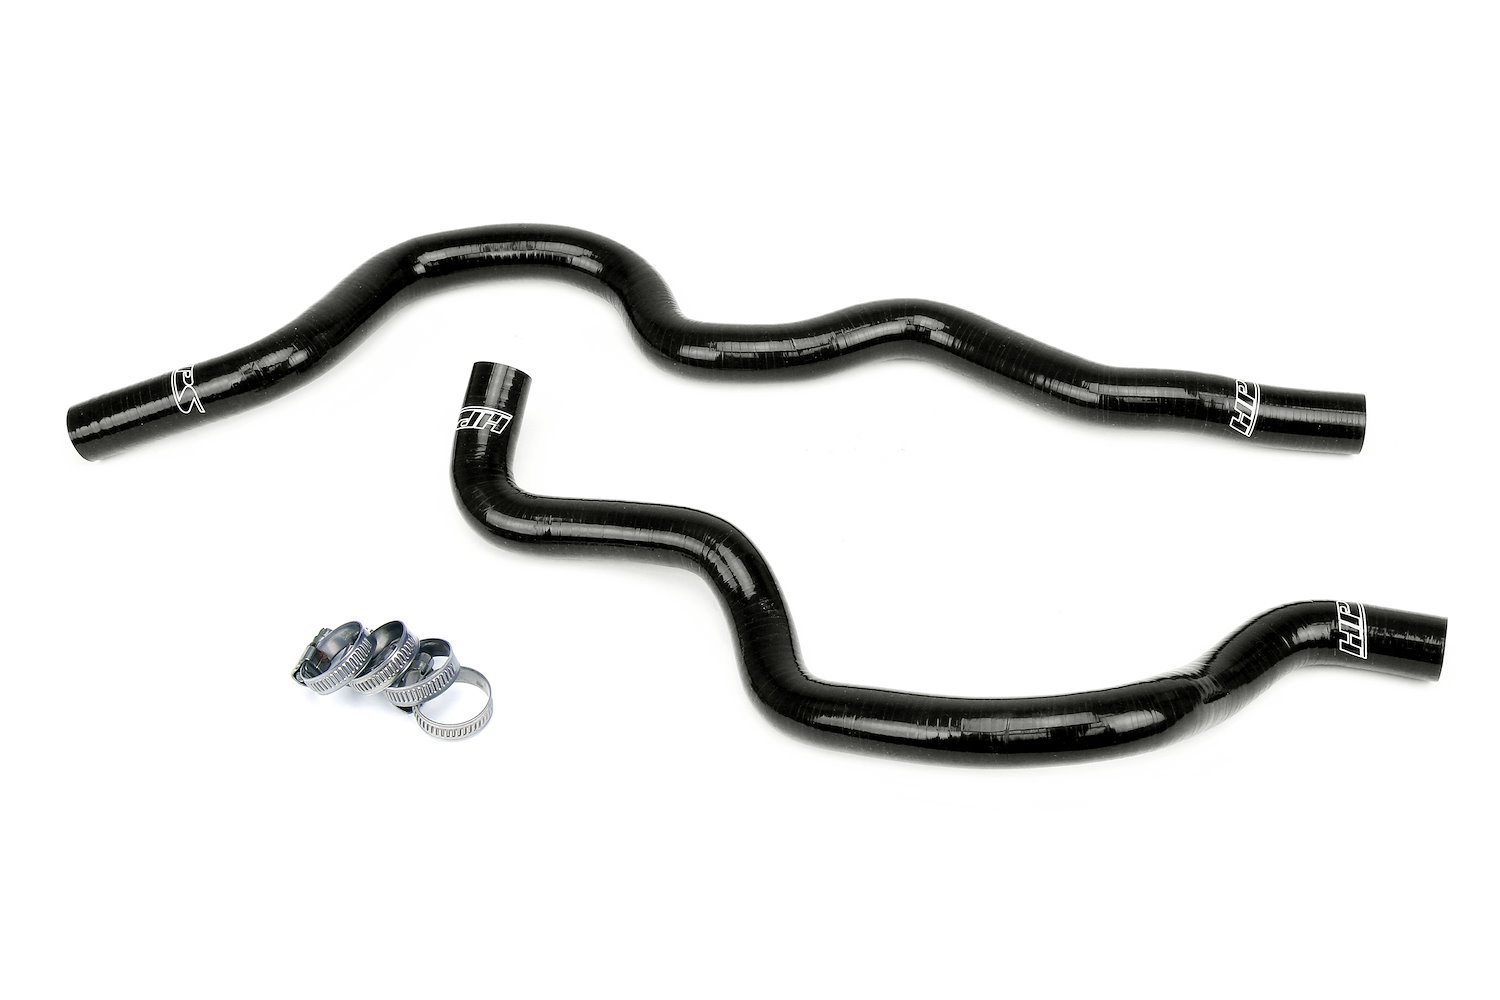 57-1872-BLK Heater Hose Kit, 3-Ply Reinforced Silicone, Replaces Rubber Heater Coolant Hoses